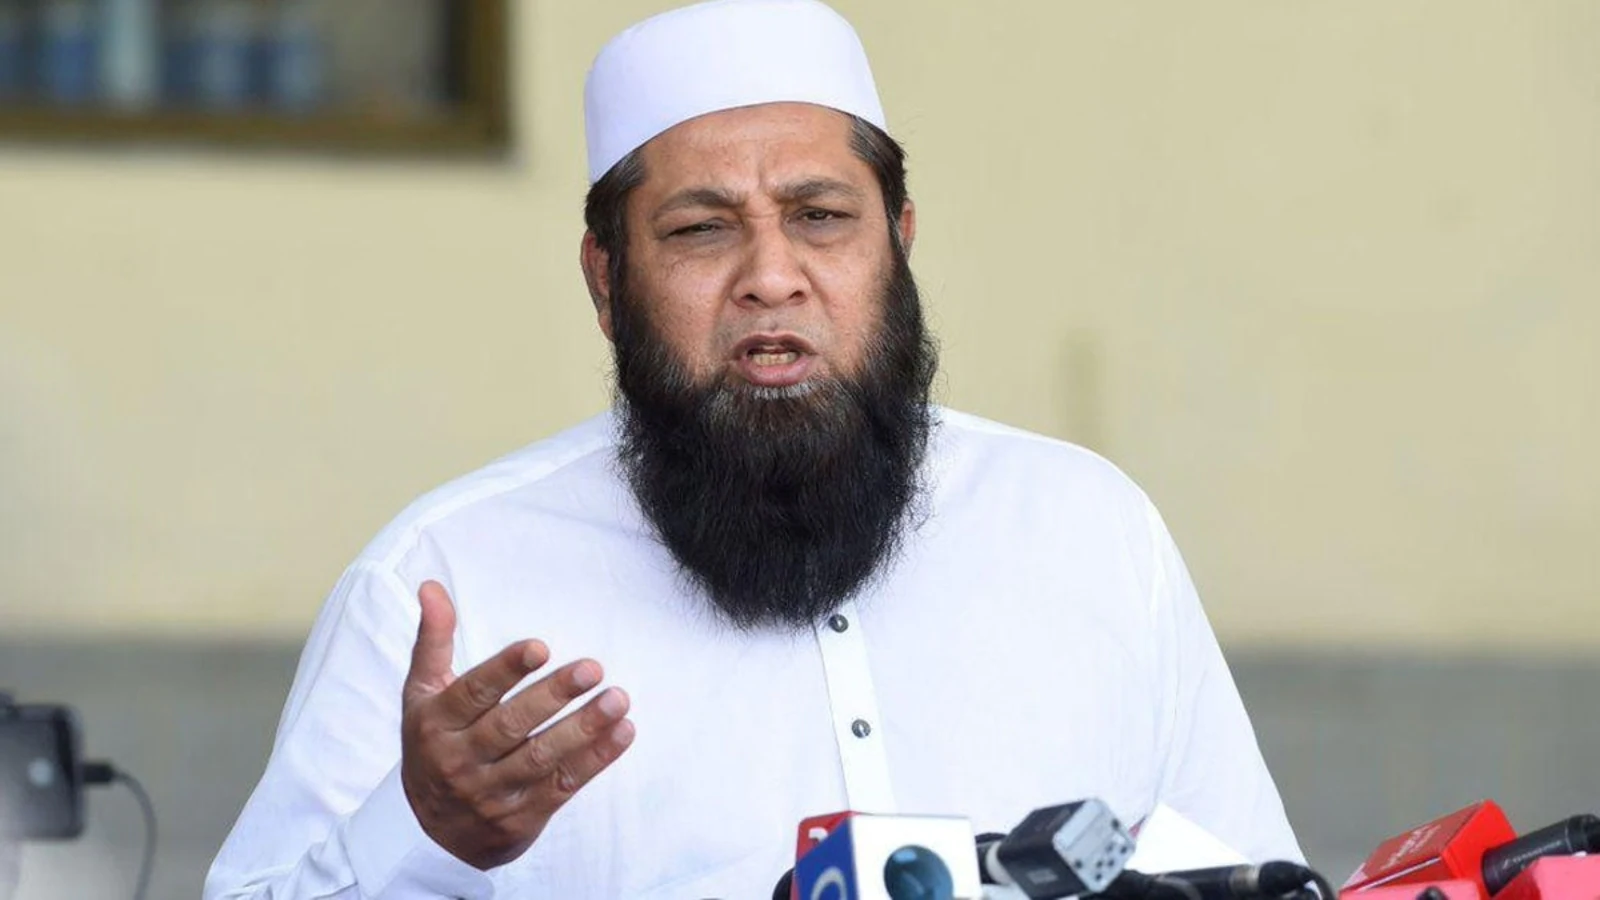 Inzmam-ul-haq says Bangladesh team was not right know what else he thinks.